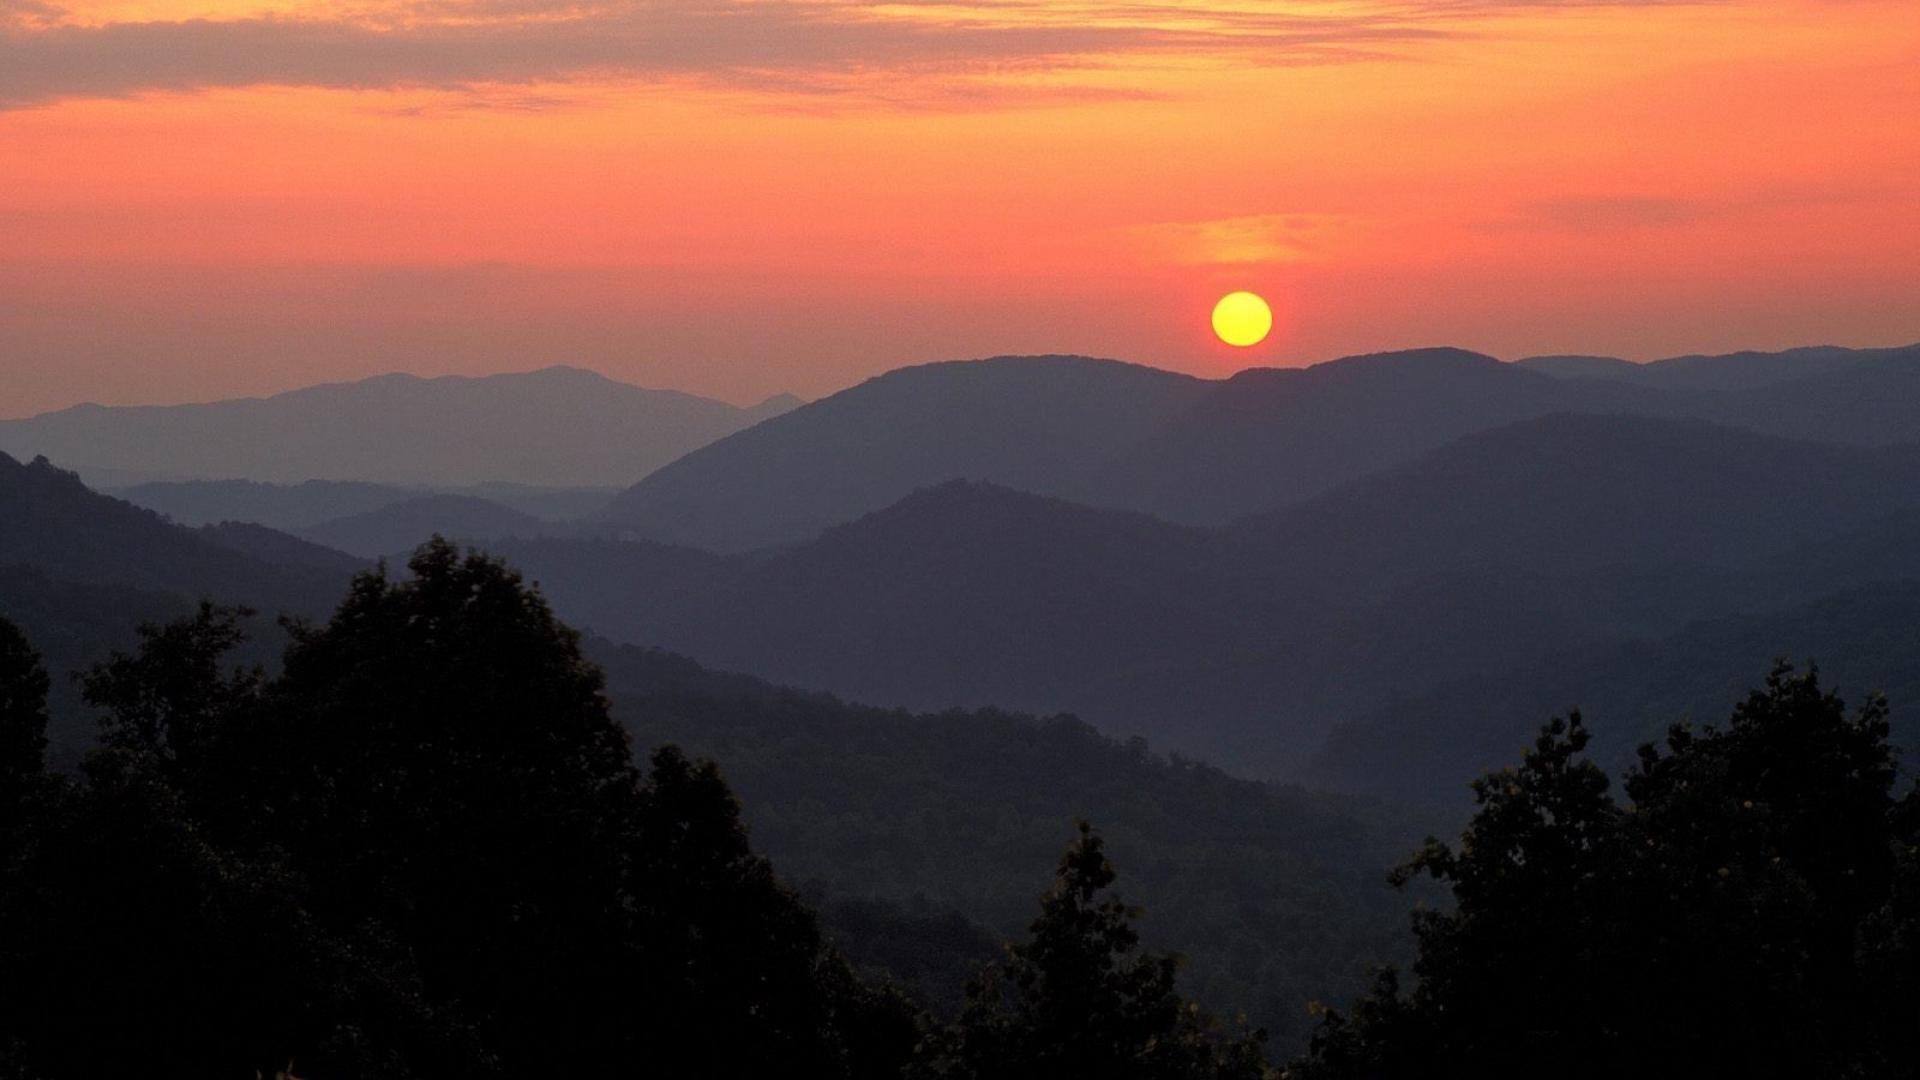 Sunrise nature point national park great smoky mountains wallpaper